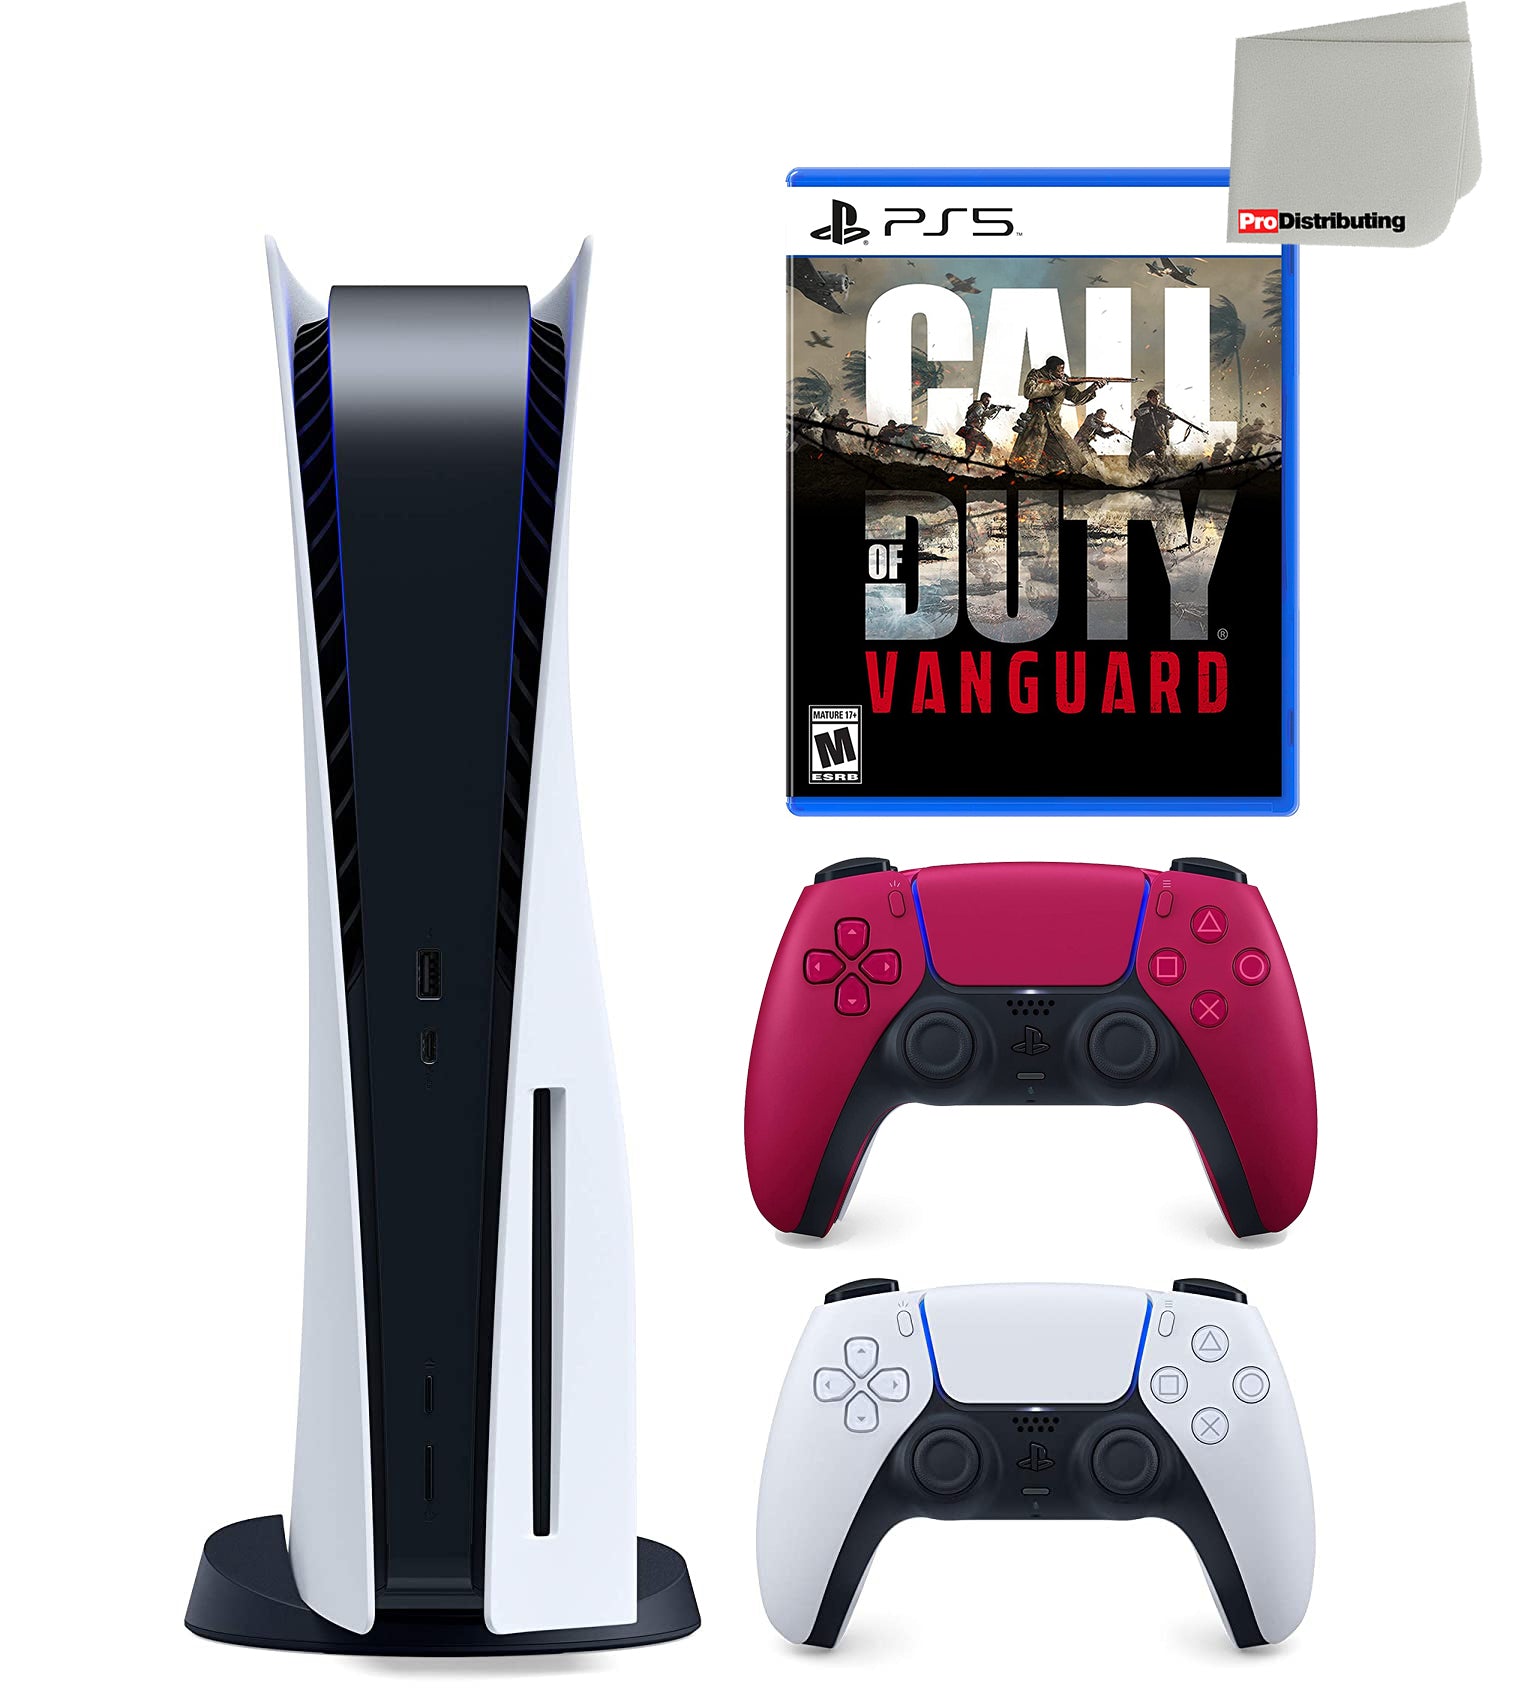 Sony Playstation 5 Disc Version (Sony PS5 Disc) with Cosmic Red Extra Controller, Call of Duty: Vanguard and Microfiber Cleaning Cloth Bundle - Pro-Distributing